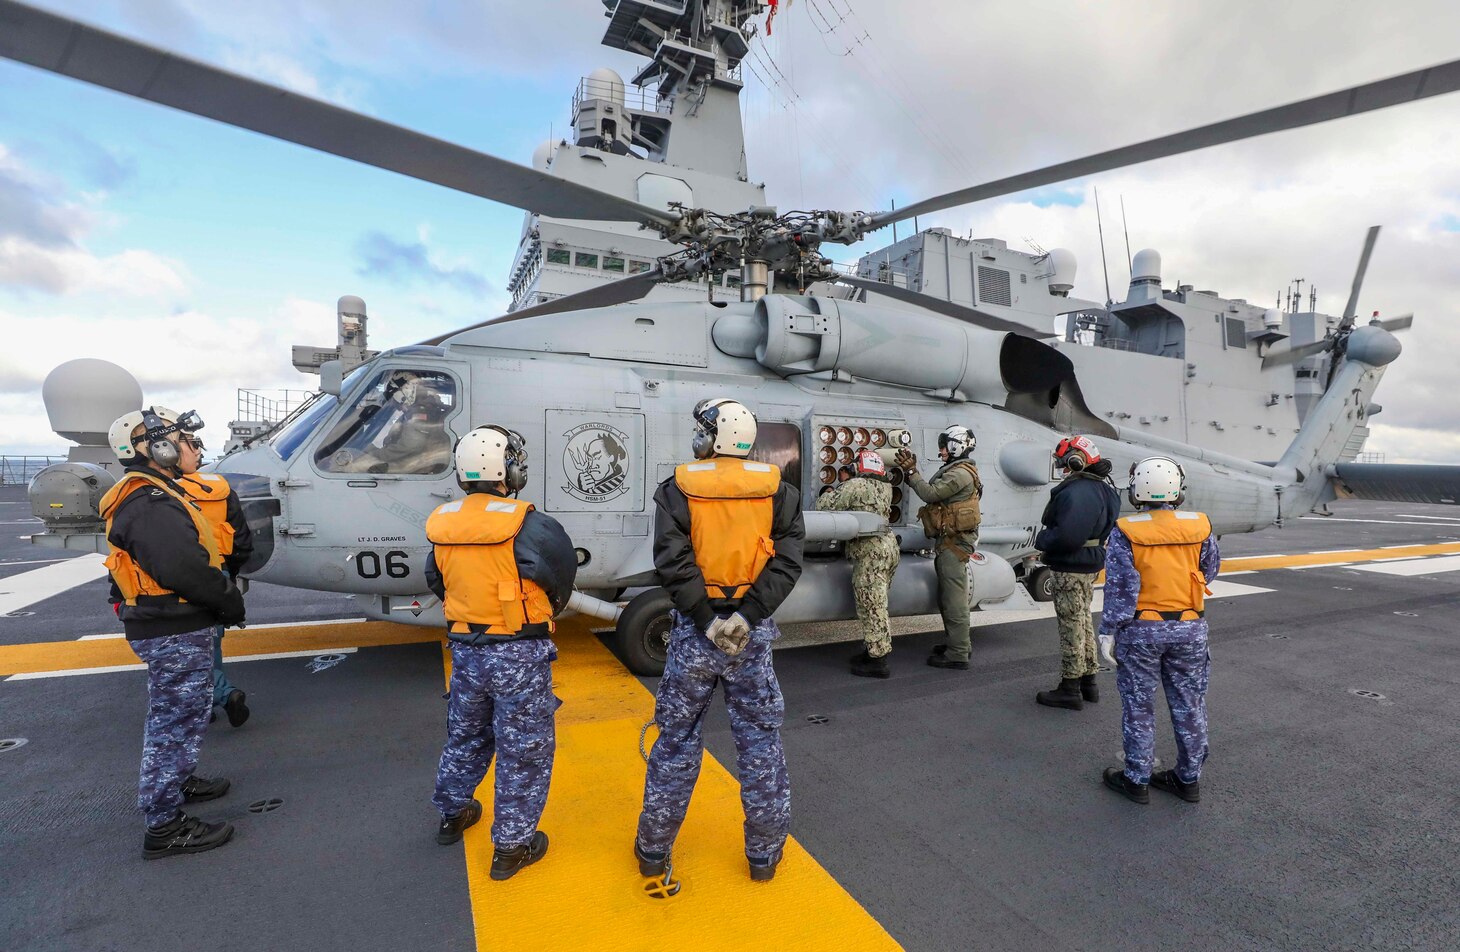 PHILIPPINE SEA (Dec. 6, 2022) Naval Air Crewman (Helicopter) 2nd Class Maxwell Bohnert and Aviation Ordnanceman 2nd Class Elouise Ellis, load and inspect sonobuoys in an MH-60R Sea Hawk helicopter assigned to the “Warlords” of Helicopter Maritime Strike Squadron (HSM) 51 aboard the Japan Maritime Self-Defense Force (JMSDF) multi-purpose destroyer JS Izumo (DDH 183) during a bi-lateral anti-submarine warfare (ASW) exercise, Dec. 6. The U.S. Navy and JMSDF regularly fly, sail and operate together with other Allies and partners to promote security and stability throughout the region. (U.S. Navy photo by Mass Communication Specialist 1st Class Deanna C. Gonzales)